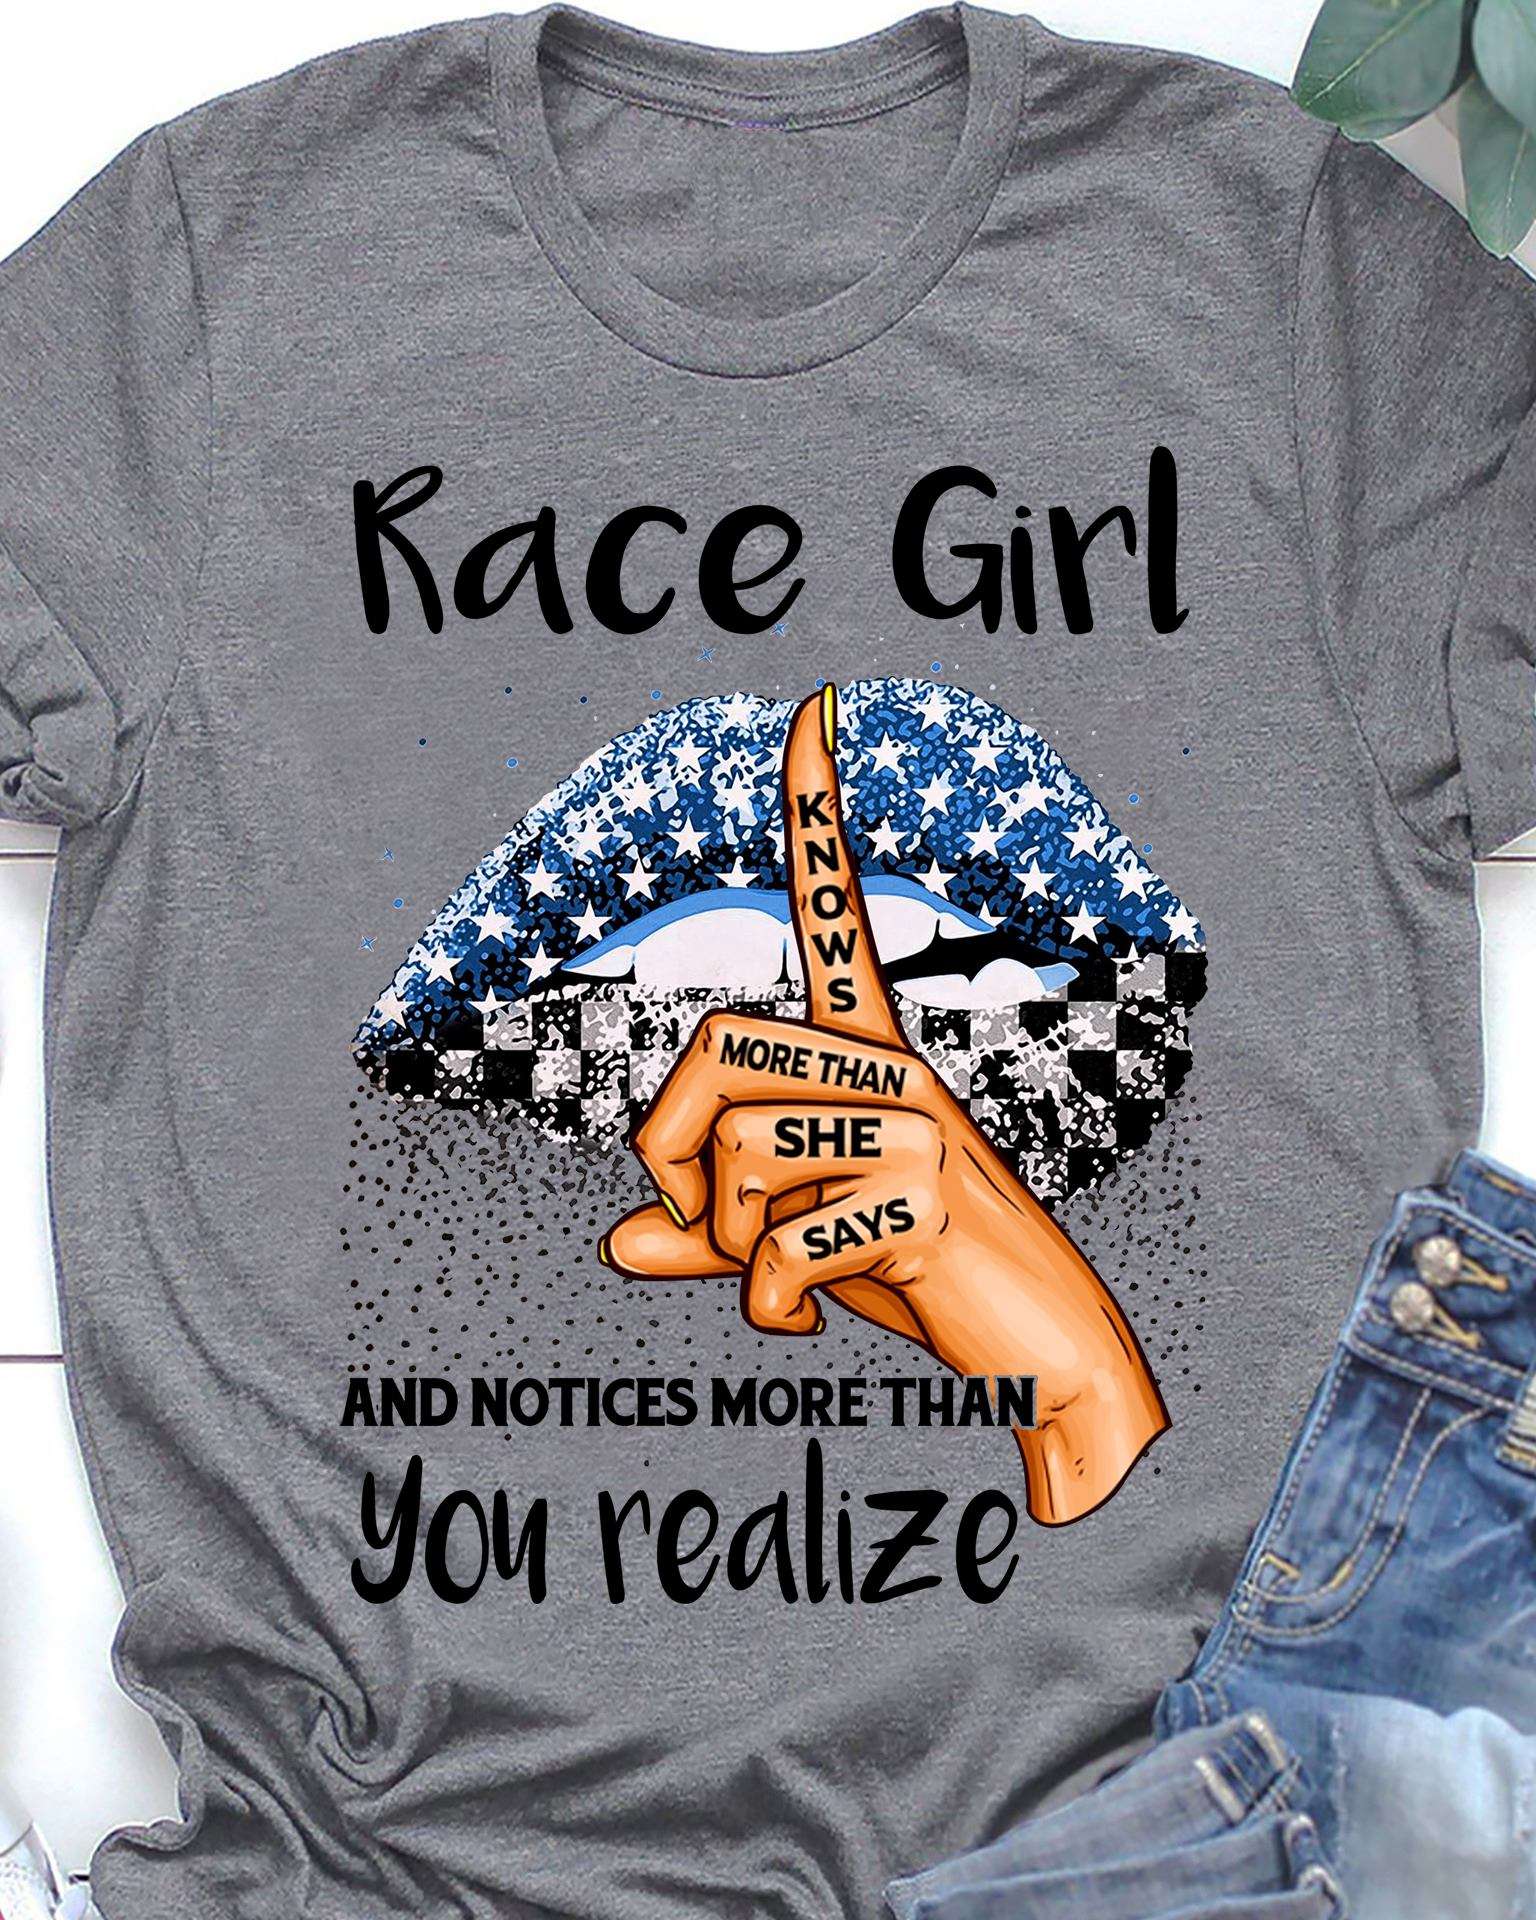 Race girl - Girl loves racing, knows more than she says and notices more than you realize